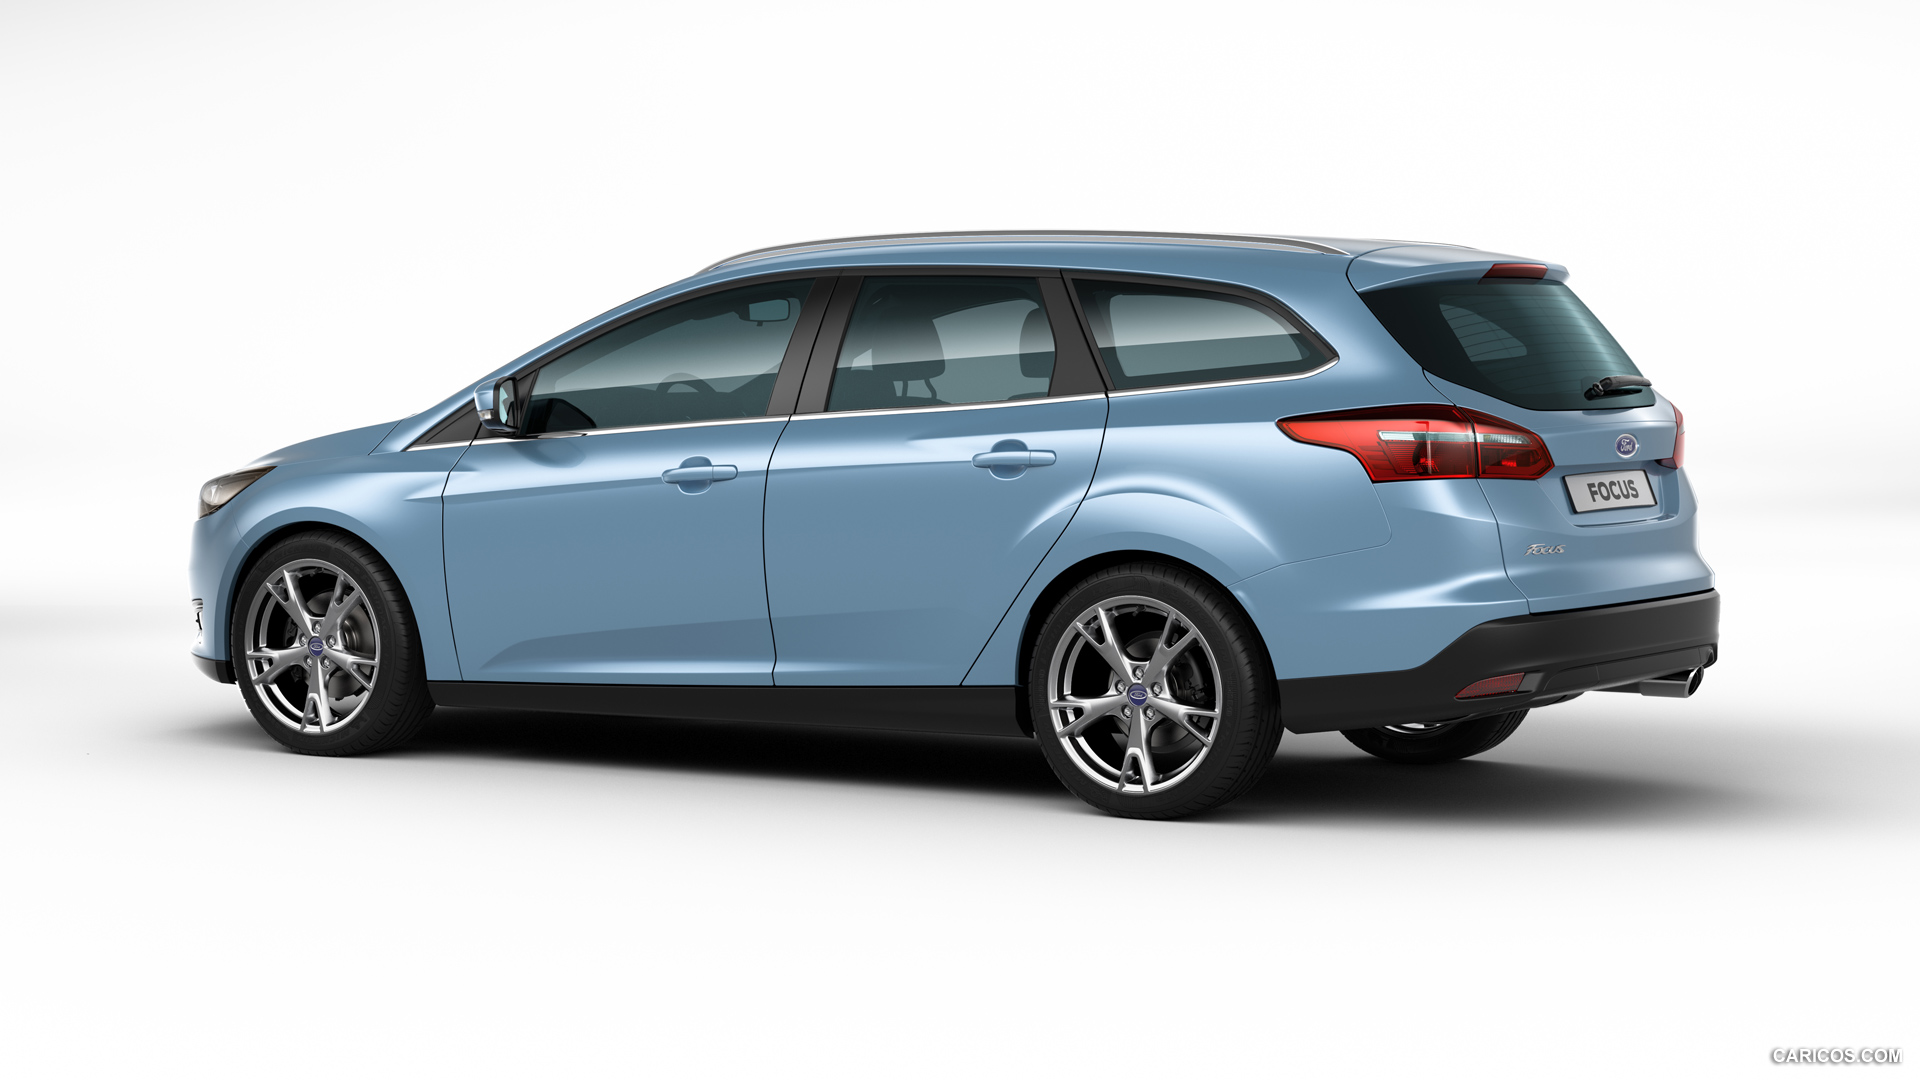 2015 Ford Focus Wagon Backgrounds, Compatible - PC, Mobile, Gadgets| 1920x1080 px